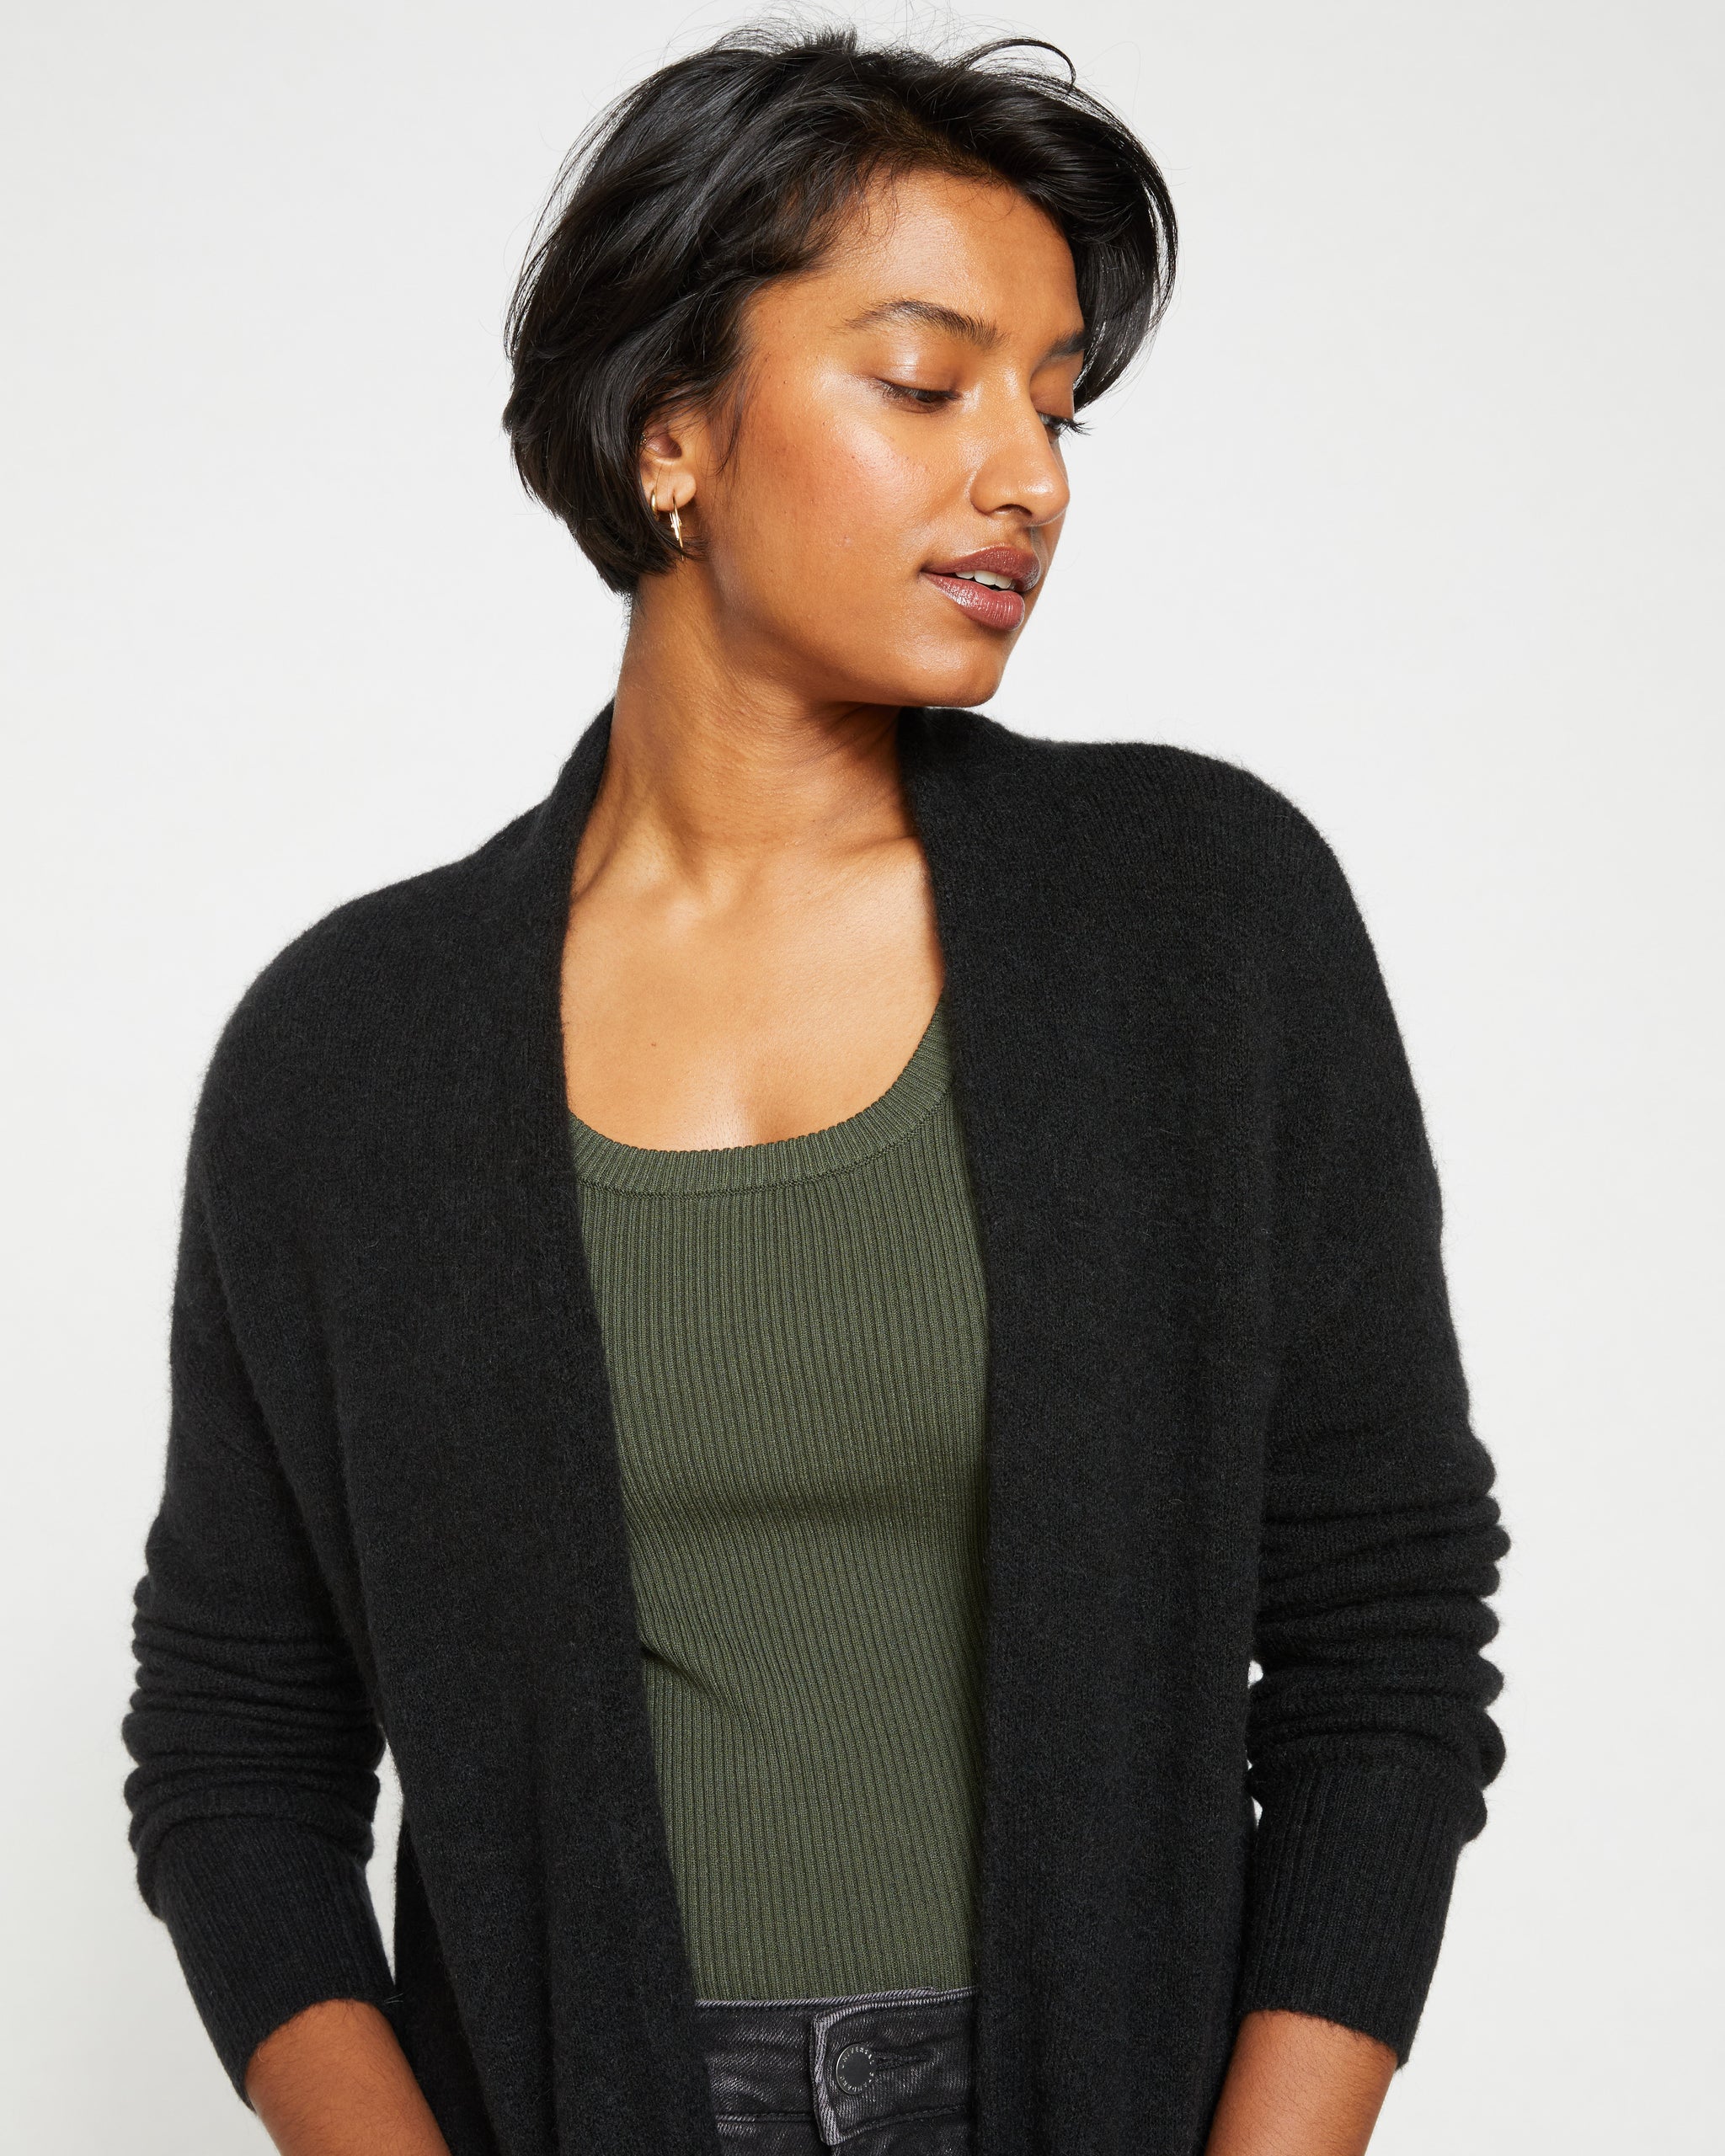 Plus Size Knit Cardigan Plus Size Layer Sweater Duster